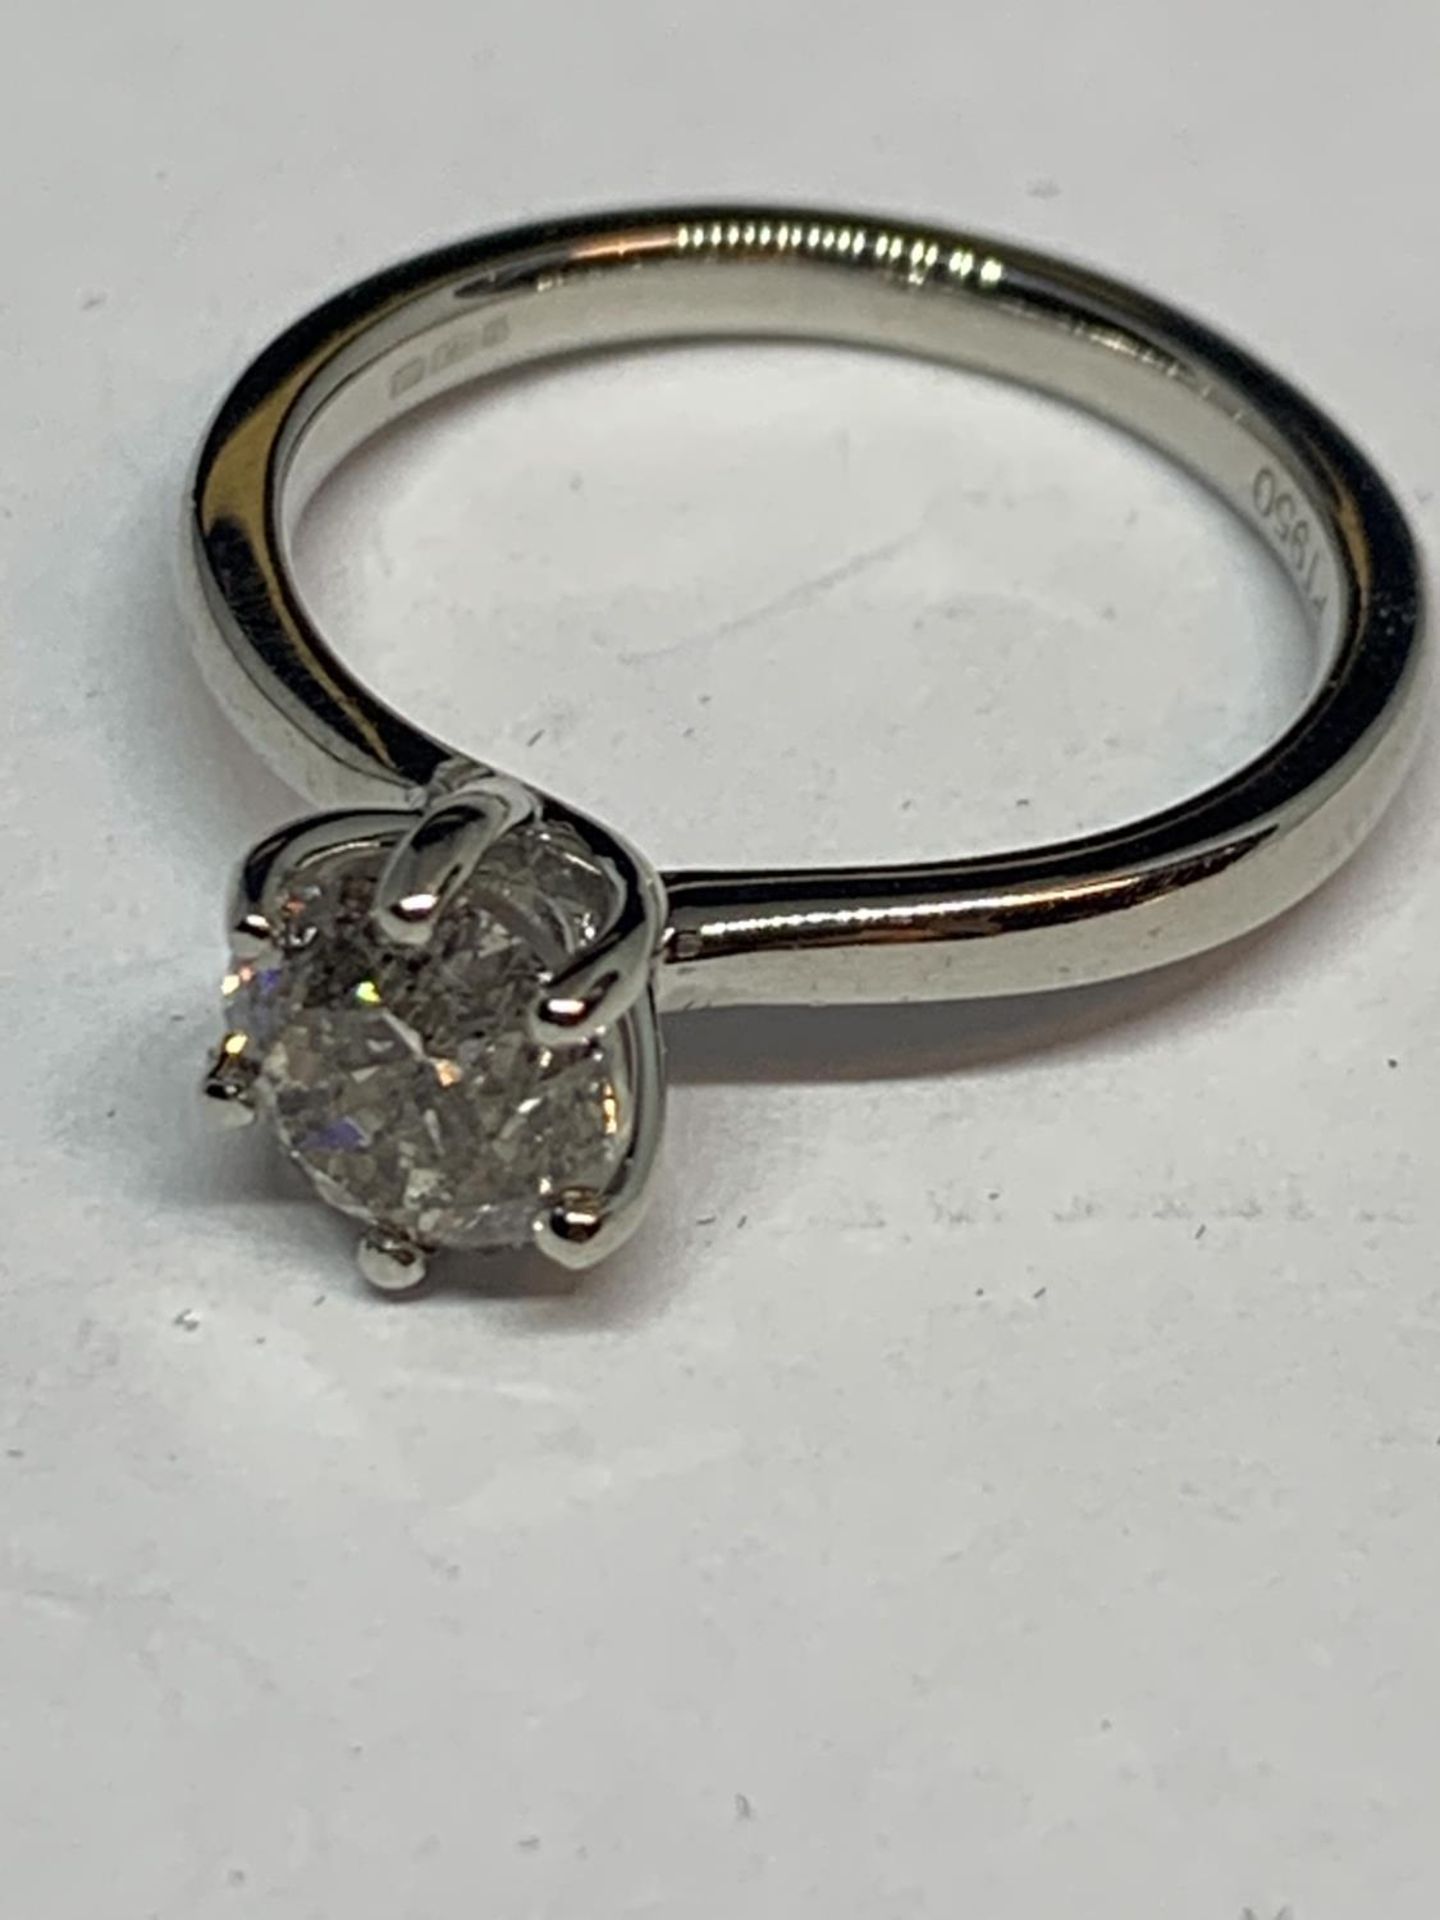 A PLATINIUM RING WITH A 1.37 CARAT SOLITAIRE DIAMOND SIZE M WITH A PRESENTATION BOX - Image 2 of 5